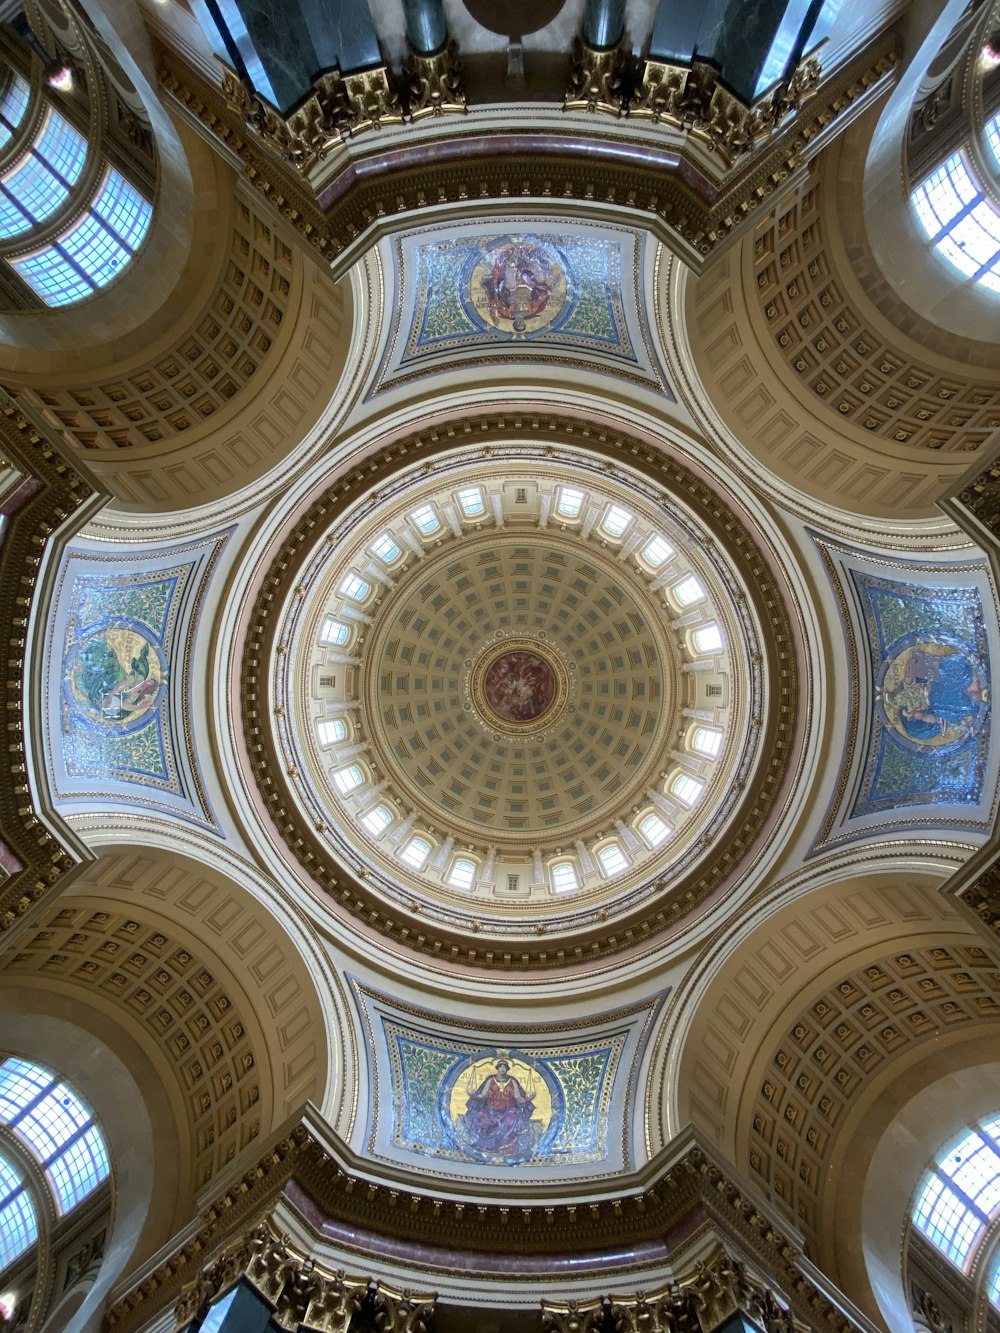 a large ornate ceiling with many windows